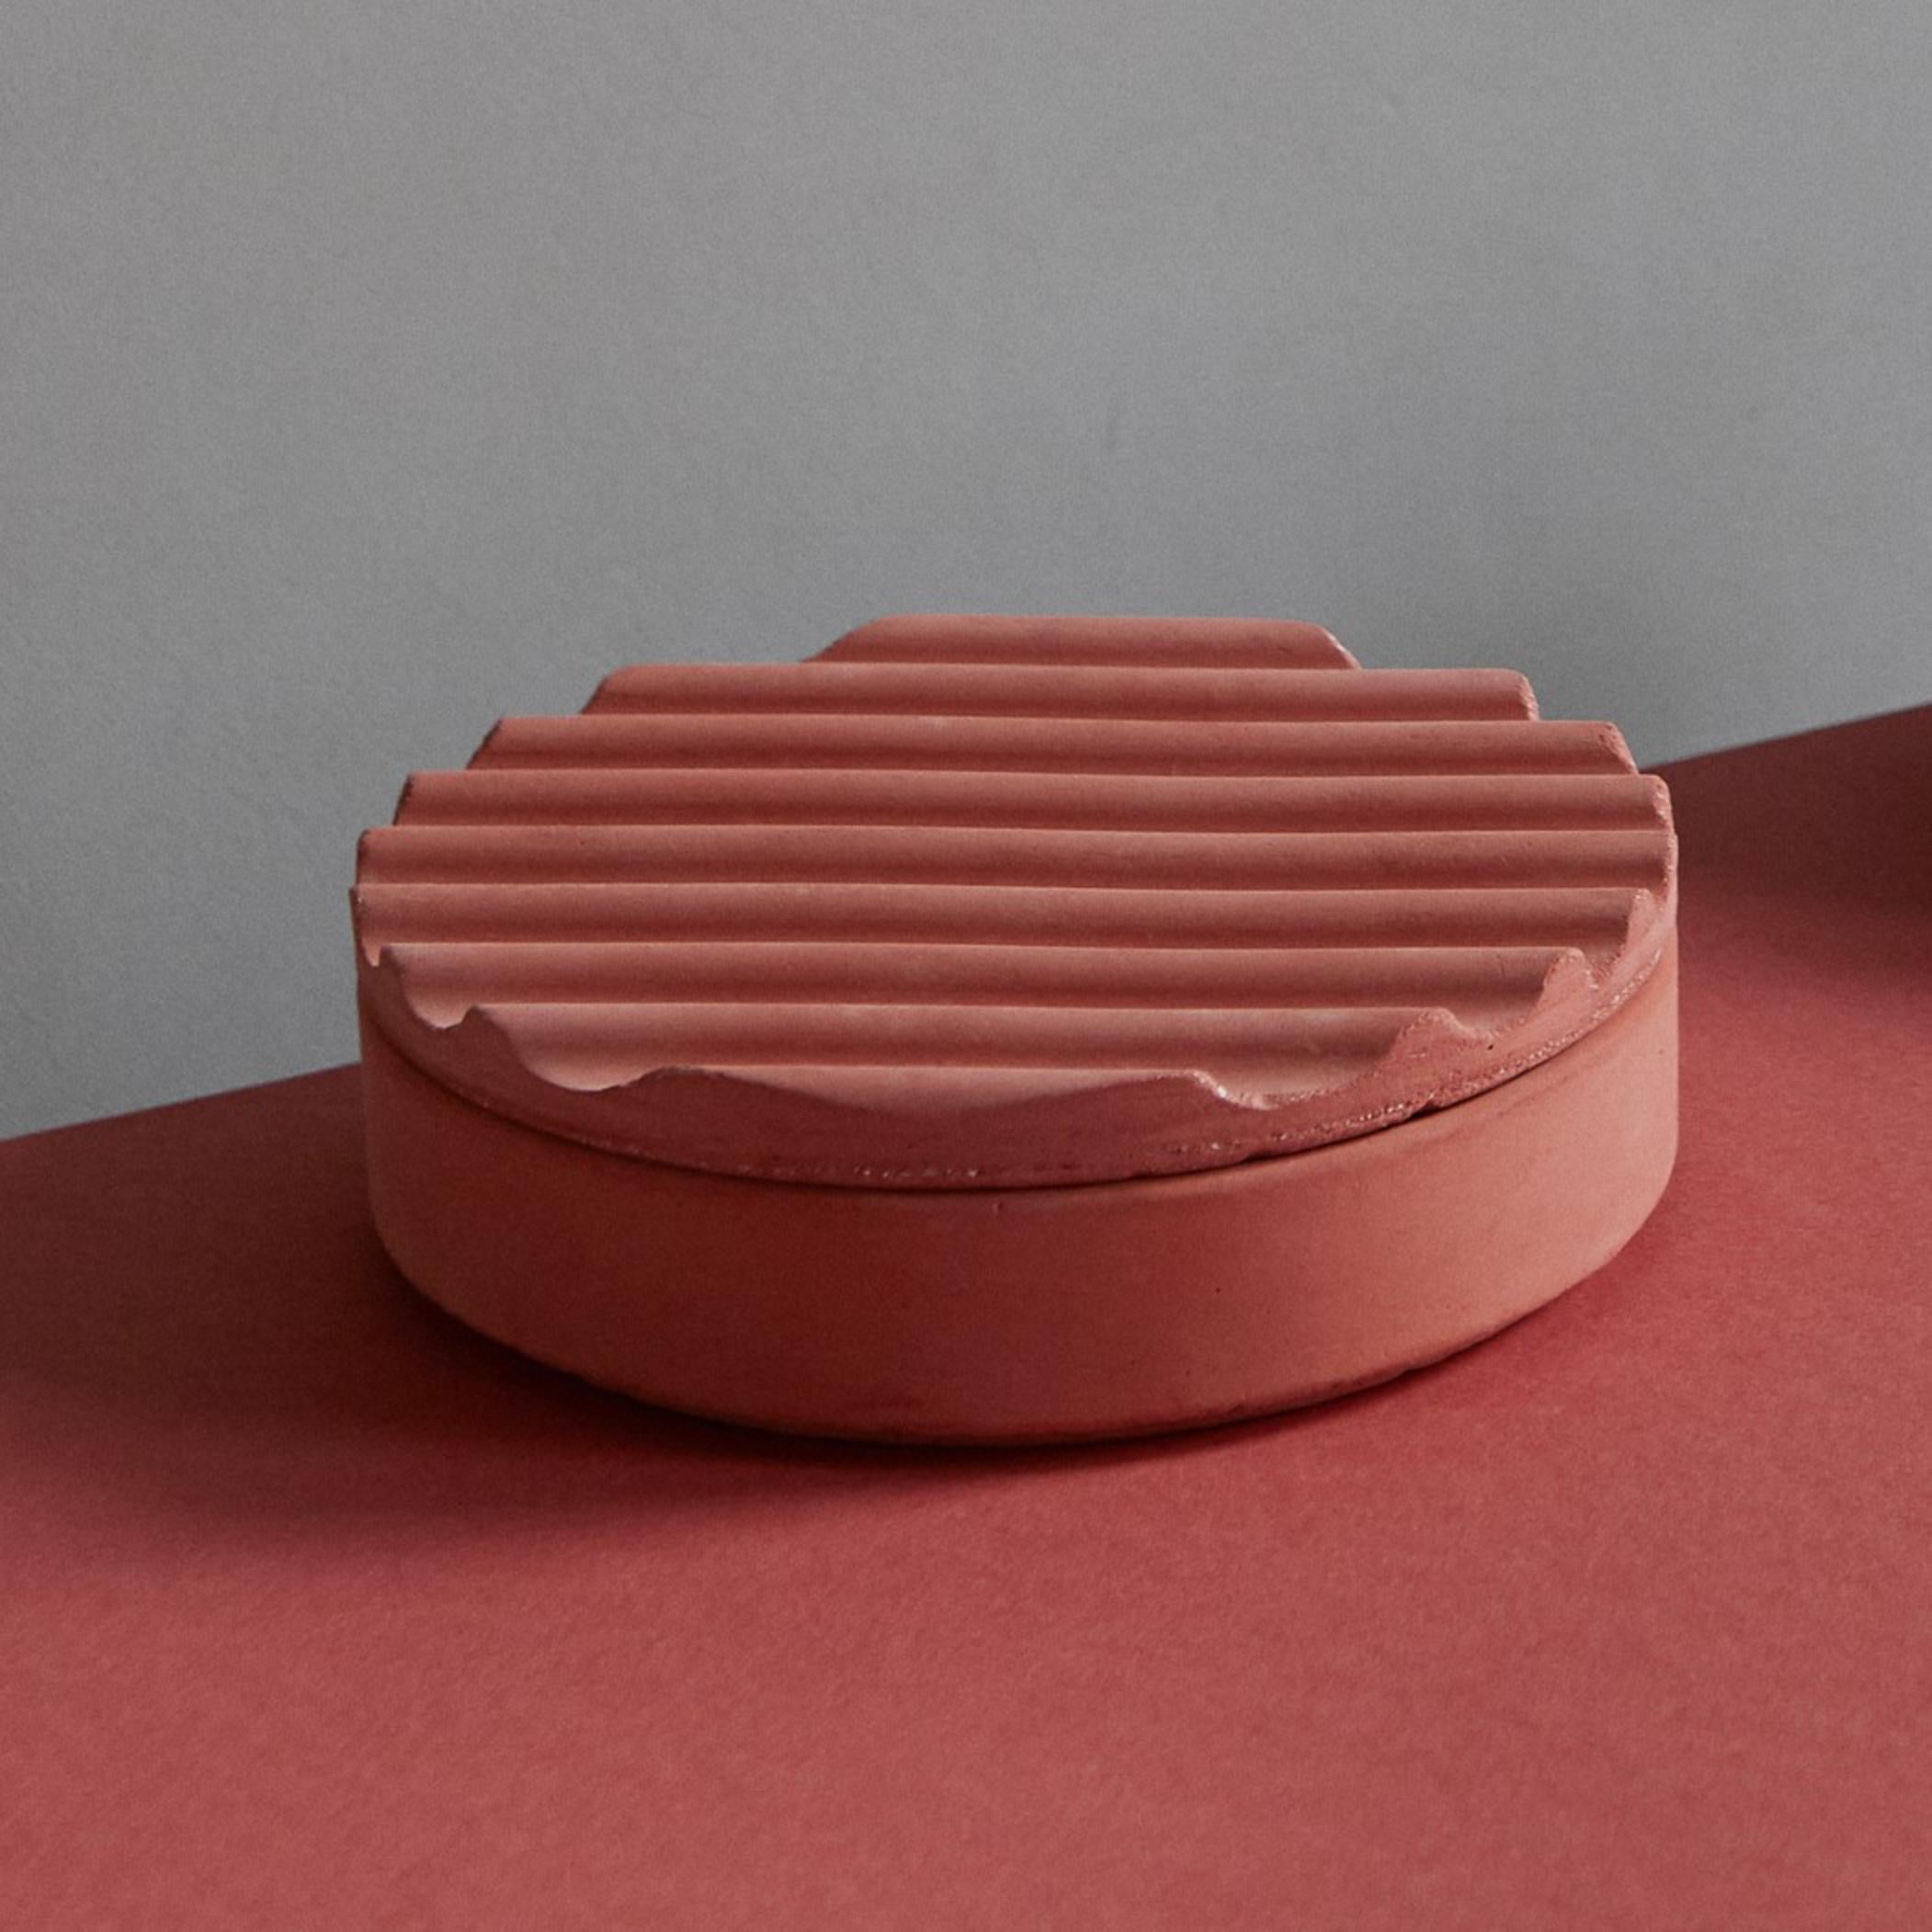 Set of 2 ripple vessels by Derya Arpac
Dimensions: D 17 x H 7 cm
Materials: Pigmented Concrete
Also Available: Other colors available.

Derya Arpac is a Copenhagen based architect and furniture designer.
She holds a Master of Arts in